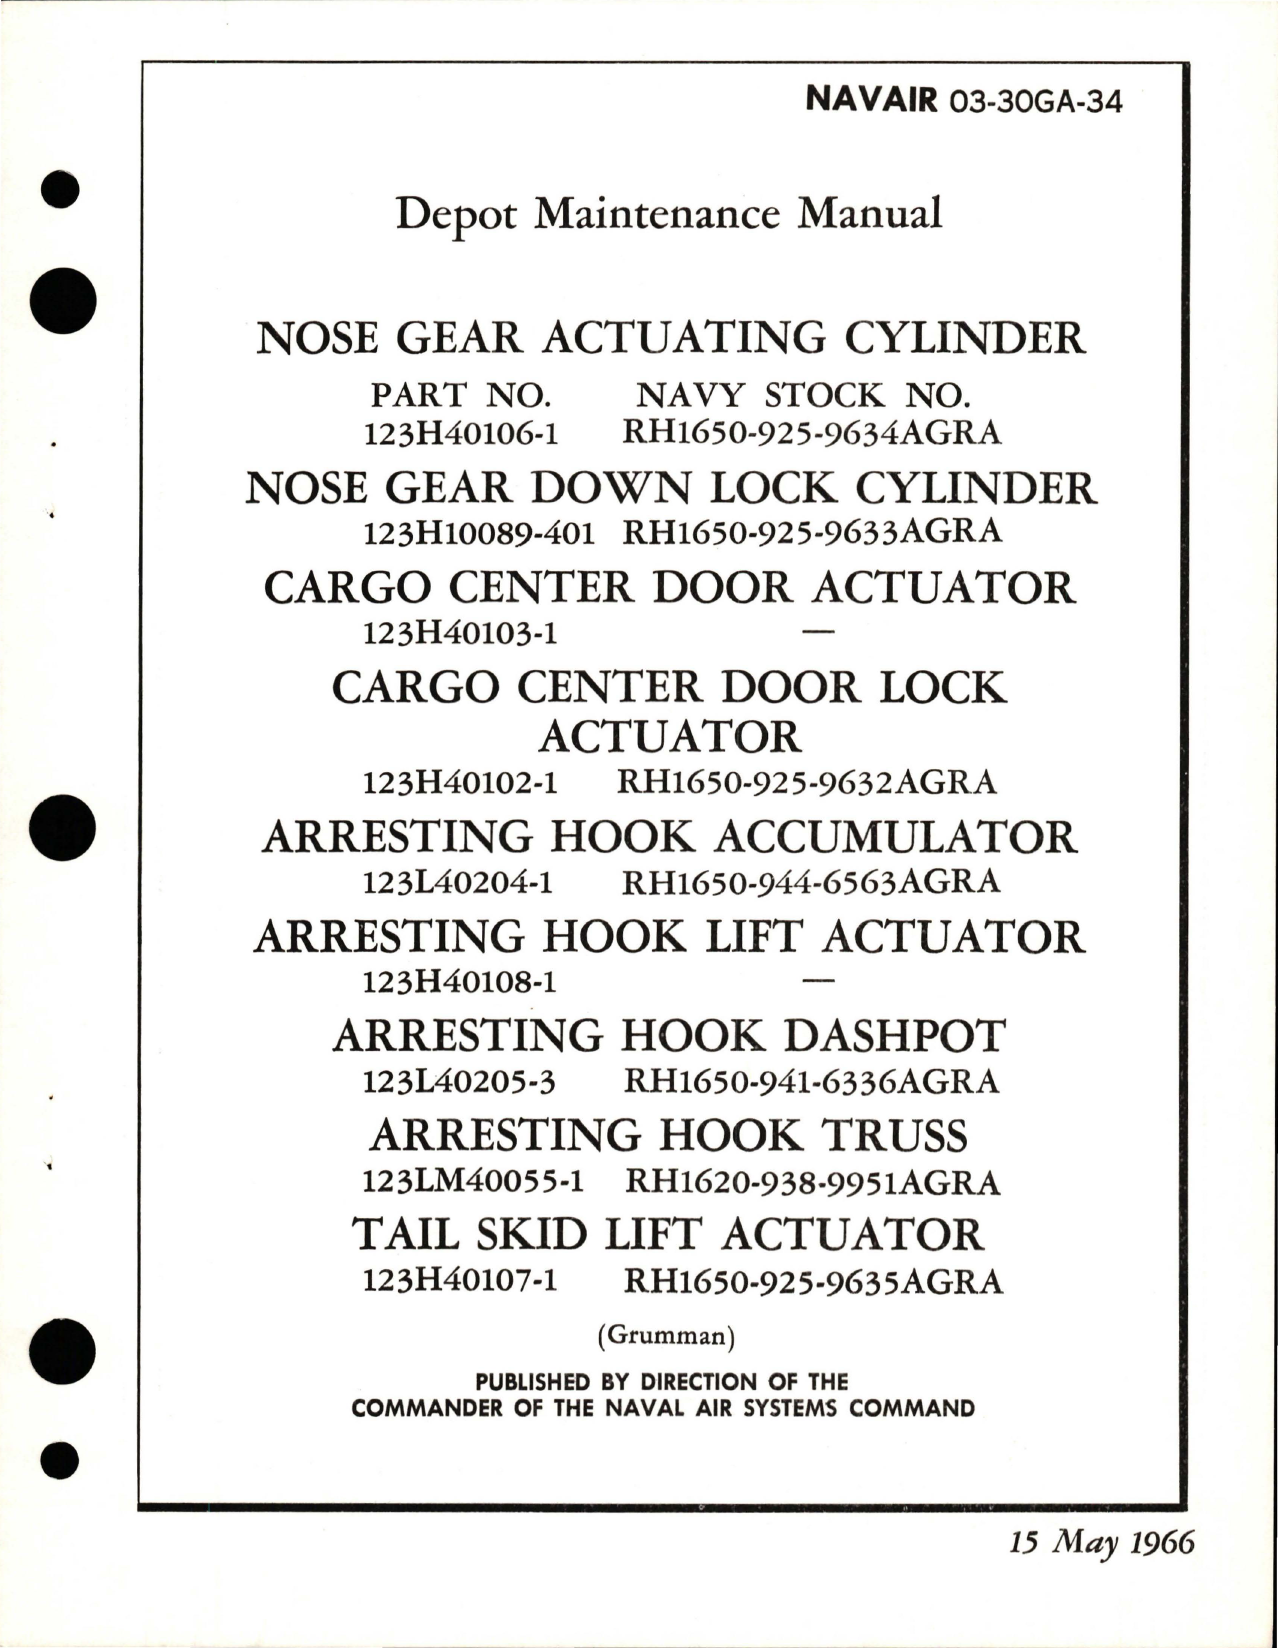 Sample page 1 from AirCorps Library document: Depot Maintenance Manual - Nose Gear Actuating and Down Lock Cylinder - Cargo Center Door and Center Door Lock Actuators -  Arresting Hook, Accumulator Lift, Actuator, Dashpot and Truss - Tail Skid Lift Actuator 